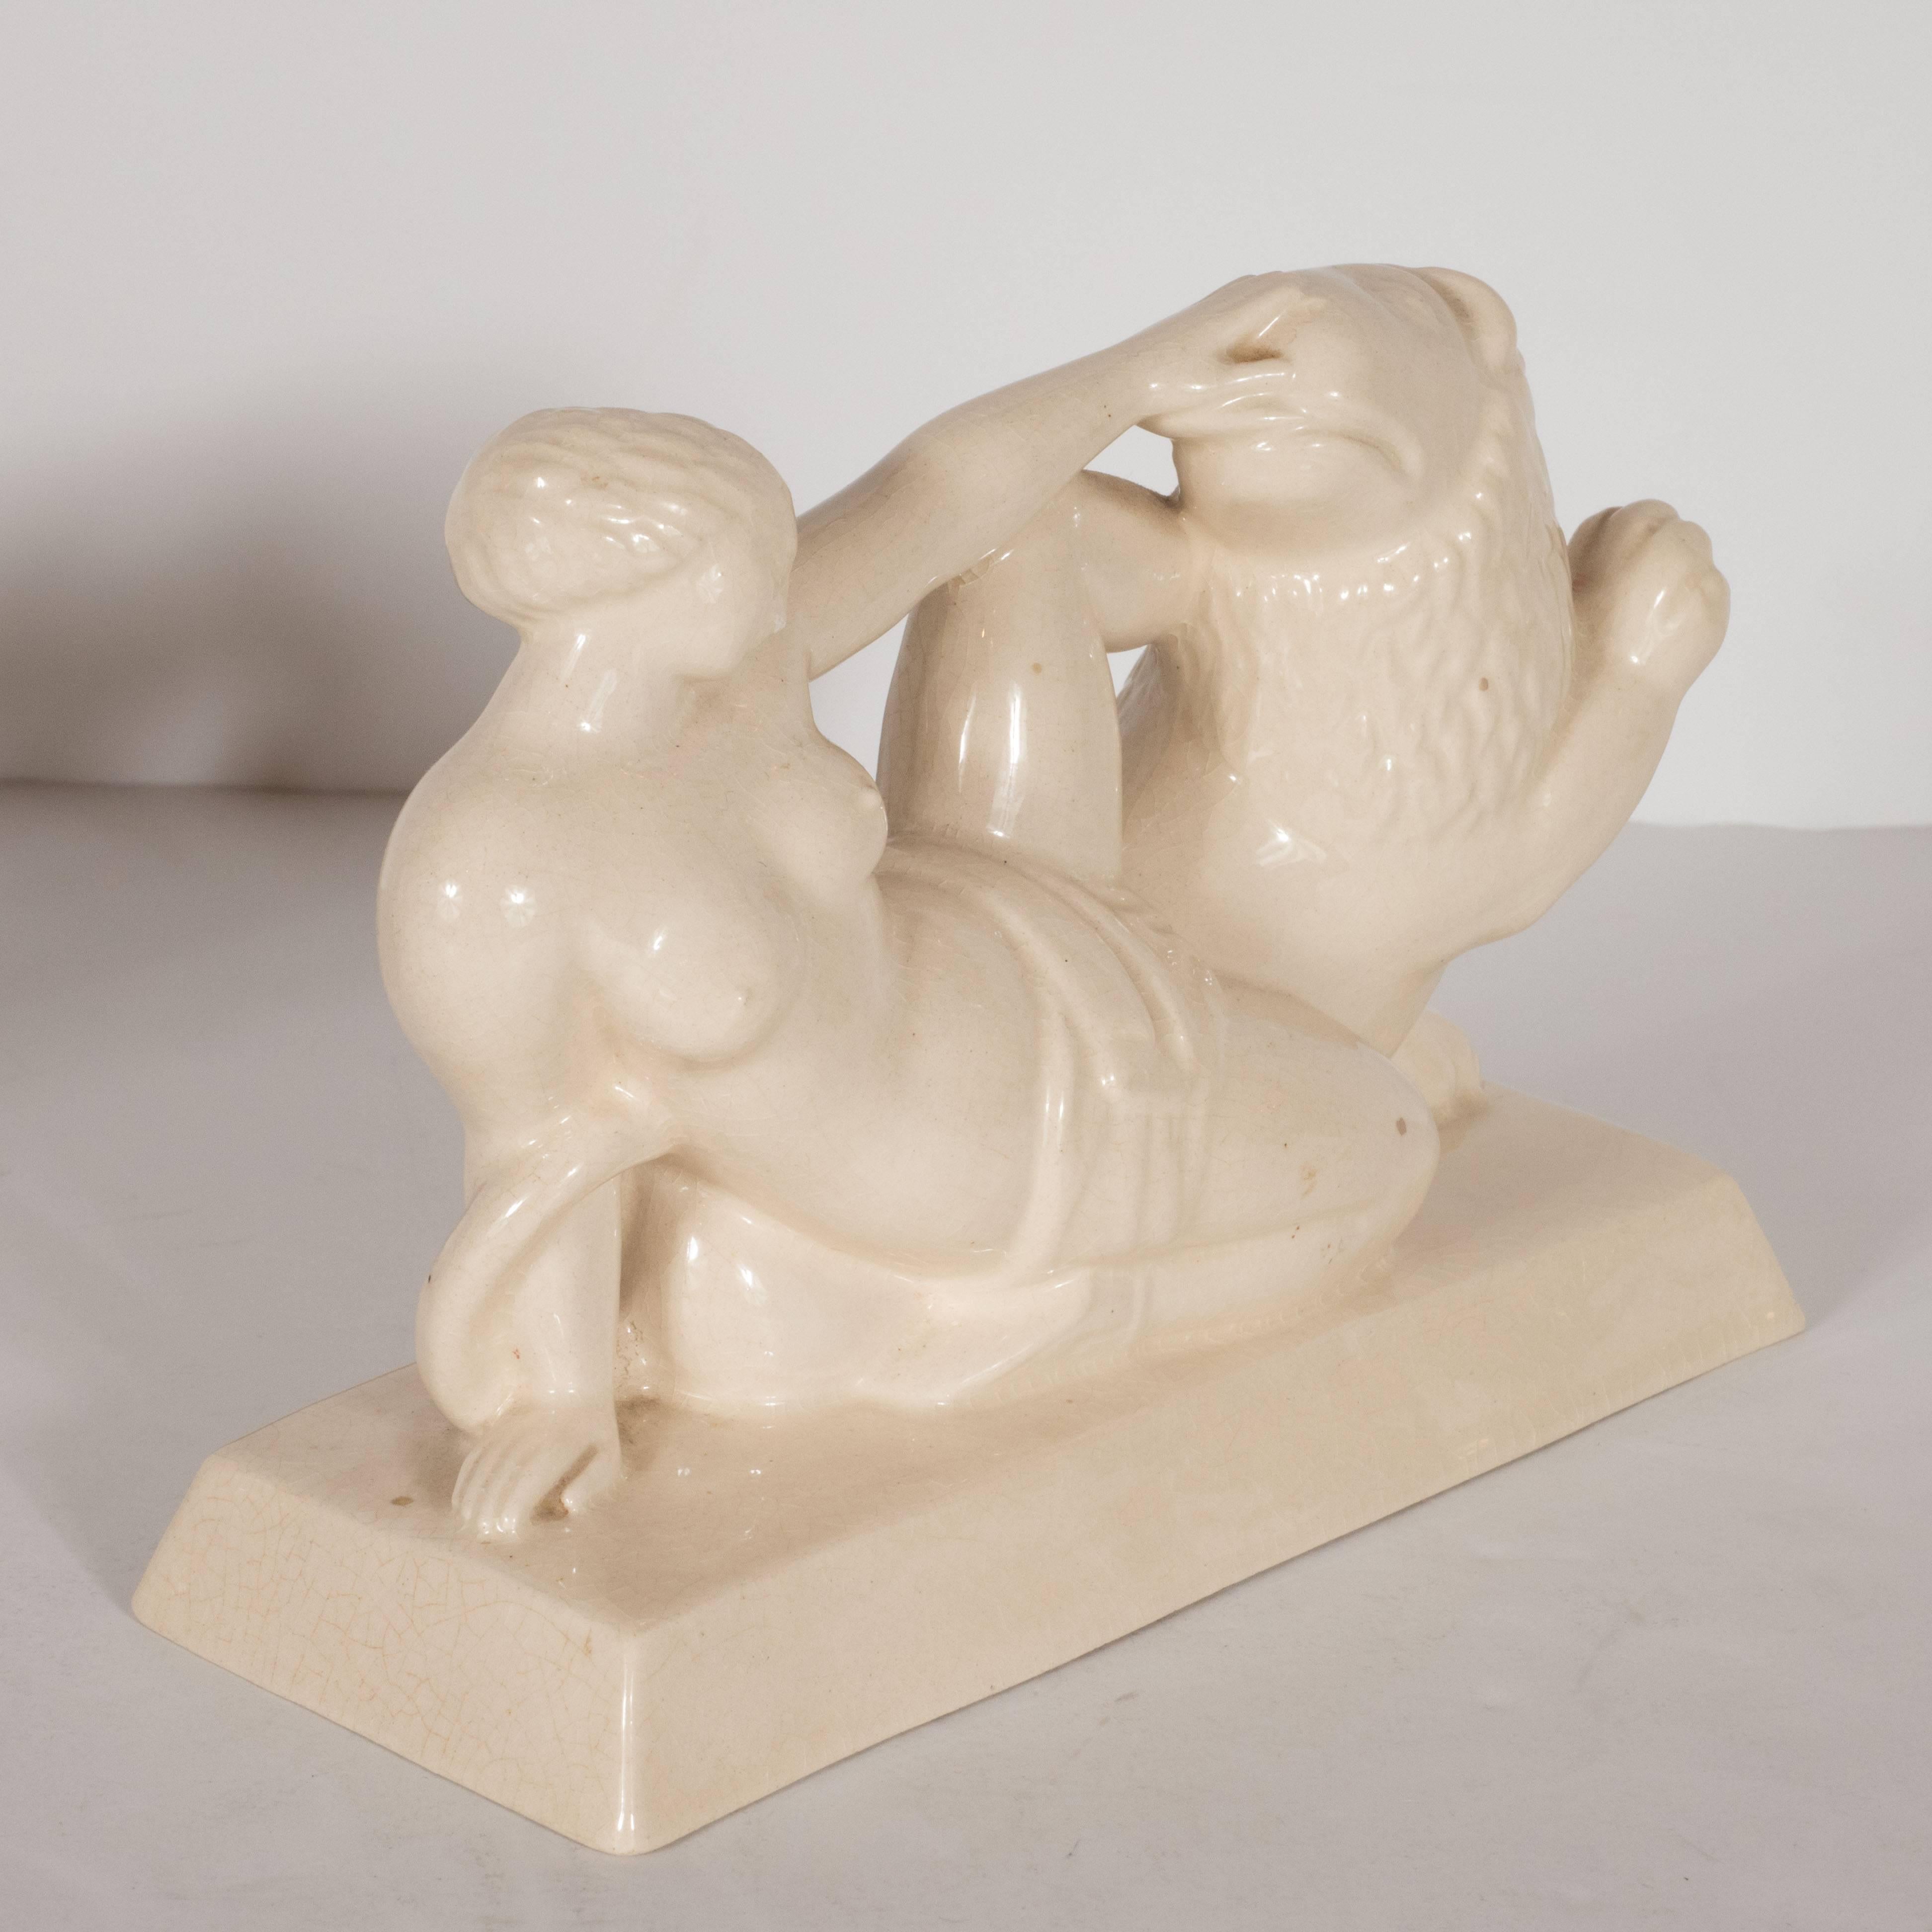 Art Deco Ceramic Book Ends Featuring Lion and Nude Female Figure For Sale 1